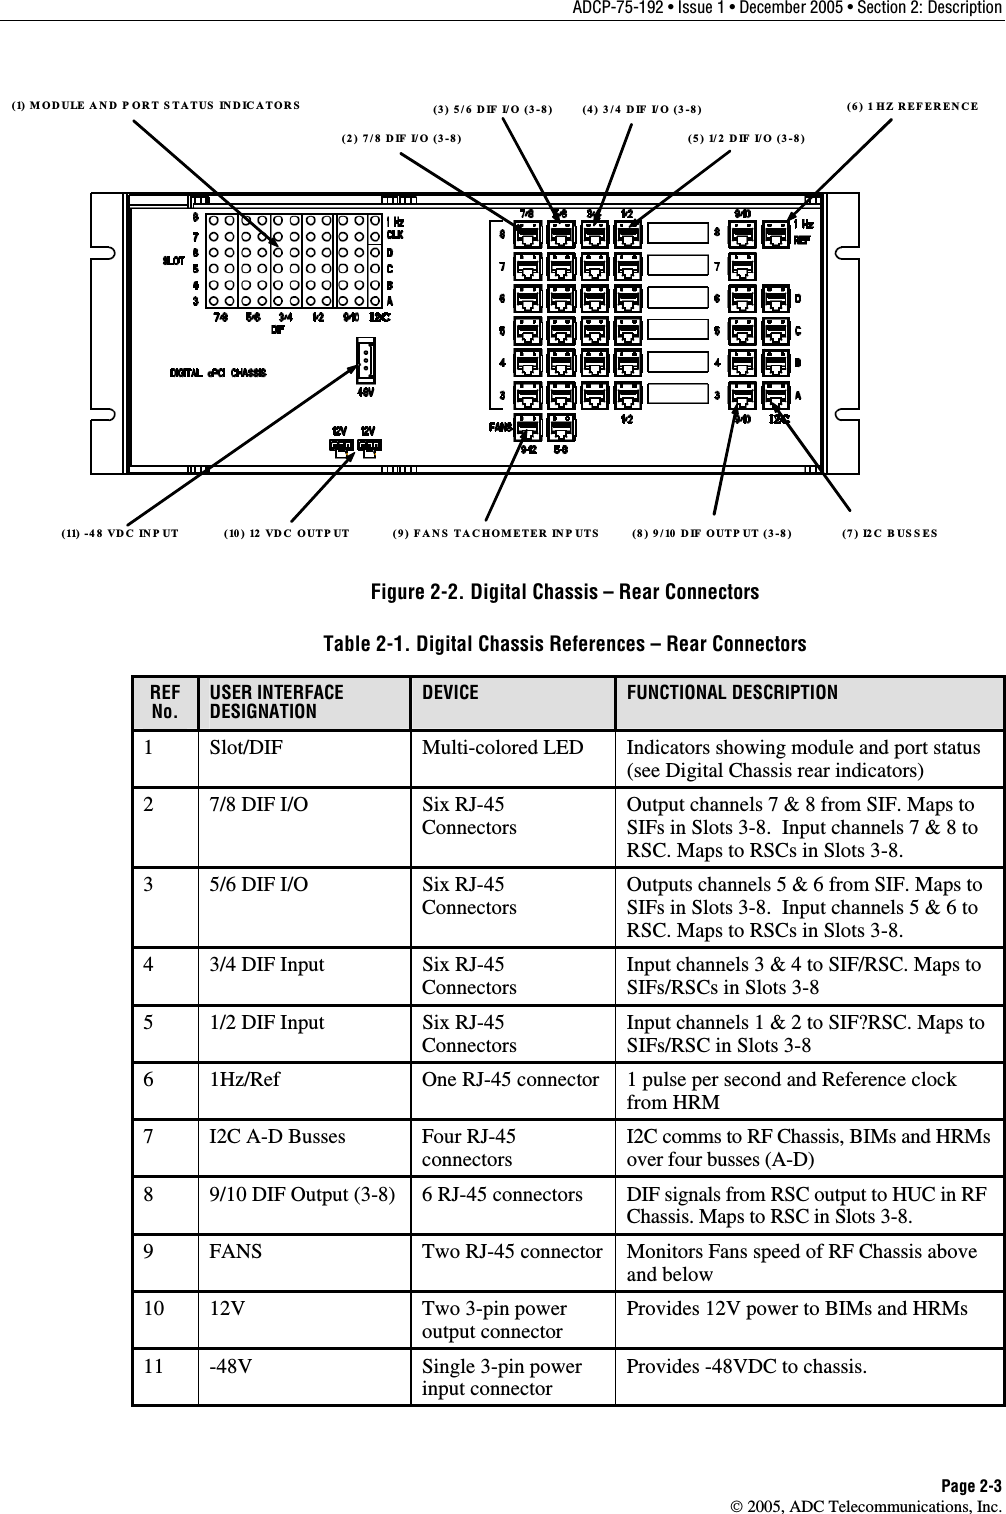 ADCP-75-192 • Issue 1 • December 2005 • Section 2: Description Page 2-3  2005, ADC Telecommunications, Inc. (1) MODULE AND P ORT STATUS INDICATORS(10) 12 VDC OUTPUT(11) -48 VDC INP UT(2) 7/8 DIF I/O (3-8)(4) 3/4 DIF I/O (3-8)(5) 1/2 DIF I/O (3-8)(3) 5/6 DIF I/O (3-8) (6) 1 HZ REFERENCE(8) 9/10 DIF OUTP UT (3-8)(9) FANS TACHOMETER INP UTS (7) I2C BUSSES Figure 2-2. Digital Chassis – Rear Connectors Table 2-1. Digital Chassis References – Rear Connectors REF No. USER INTERFACE DESIGNATION DEVICE  FUNCTIONAL DESCRIPTION 1  Slot/DIF  Multi-colored LED  Indicators showing module and port status (see Digital Chassis rear indicators) 2  7/8 DIF I/O  Six RJ-45 Connectors Output channels 7 &amp; 8 from SIF. Maps to SIFs in Slots 3-8.  Input channels 7 &amp; 8 to RSC. Maps to RSCs in Slots 3-8. 3  5/6 DIF I/O  Six RJ-45 Connectors Outputs channels 5 &amp; 6 from SIF. Maps to SIFs in Slots 3-8.  Input channels 5 &amp; 6 to RSC. Maps to RSCs in Slots 3-8. 4  3/4 DIF Input  Six RJ-45 Connectors Input channels 3 &amp; 4 to SIF/RSC. Maps to SIFs/RSCs in Slots 3-8 5  1/2 DIF Input  Six RJ-45 Connectors Input channels 1 &amp; 2 to SIF?RSC. Maps to SIFs/RSC in Slots 3-8 6  1Hz/Ref  One RJ-45 connector  1 pulse per second and Reference clock from HRM 7  I2C A-D Busses  Four RJ-45 connectors I2C comms to RF Chassis, BIMs and HRMs over four busses (A-D) 8  9/10 DIF Output (3-8)  6 RJ-45 connectors  DIF signals from RSC output to HUC in RF Chassis. Maps to RSC in Slots 3-8. 9  FANS  Two RJ-45 connector  Monitors Fans speed of RF Chassis above and below 10  12V  Two 3-pin power output connector Provides 12V power to BIMs and HRMs 11 -48V  Single 3-pin power input connector Provides -48VDC to chassis. 